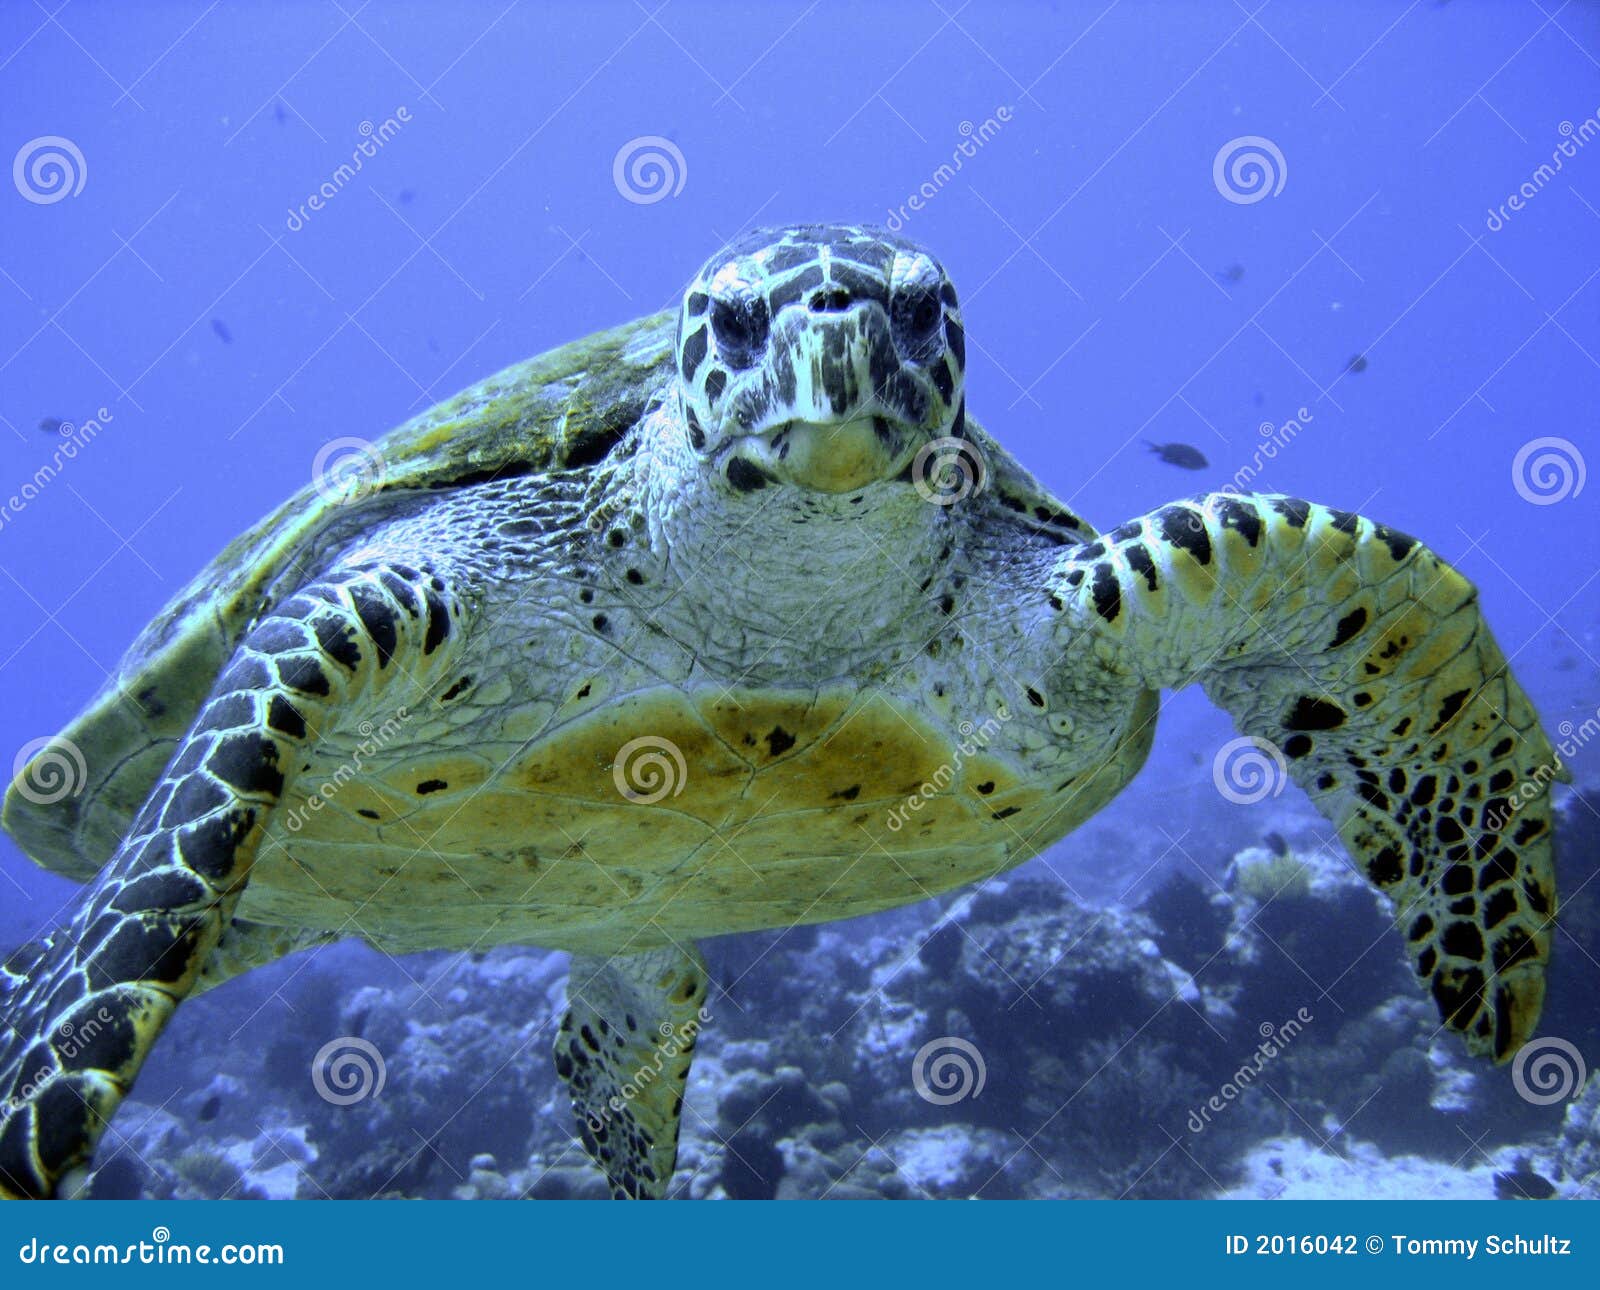 curious hawksbill sea turtle (endangered)